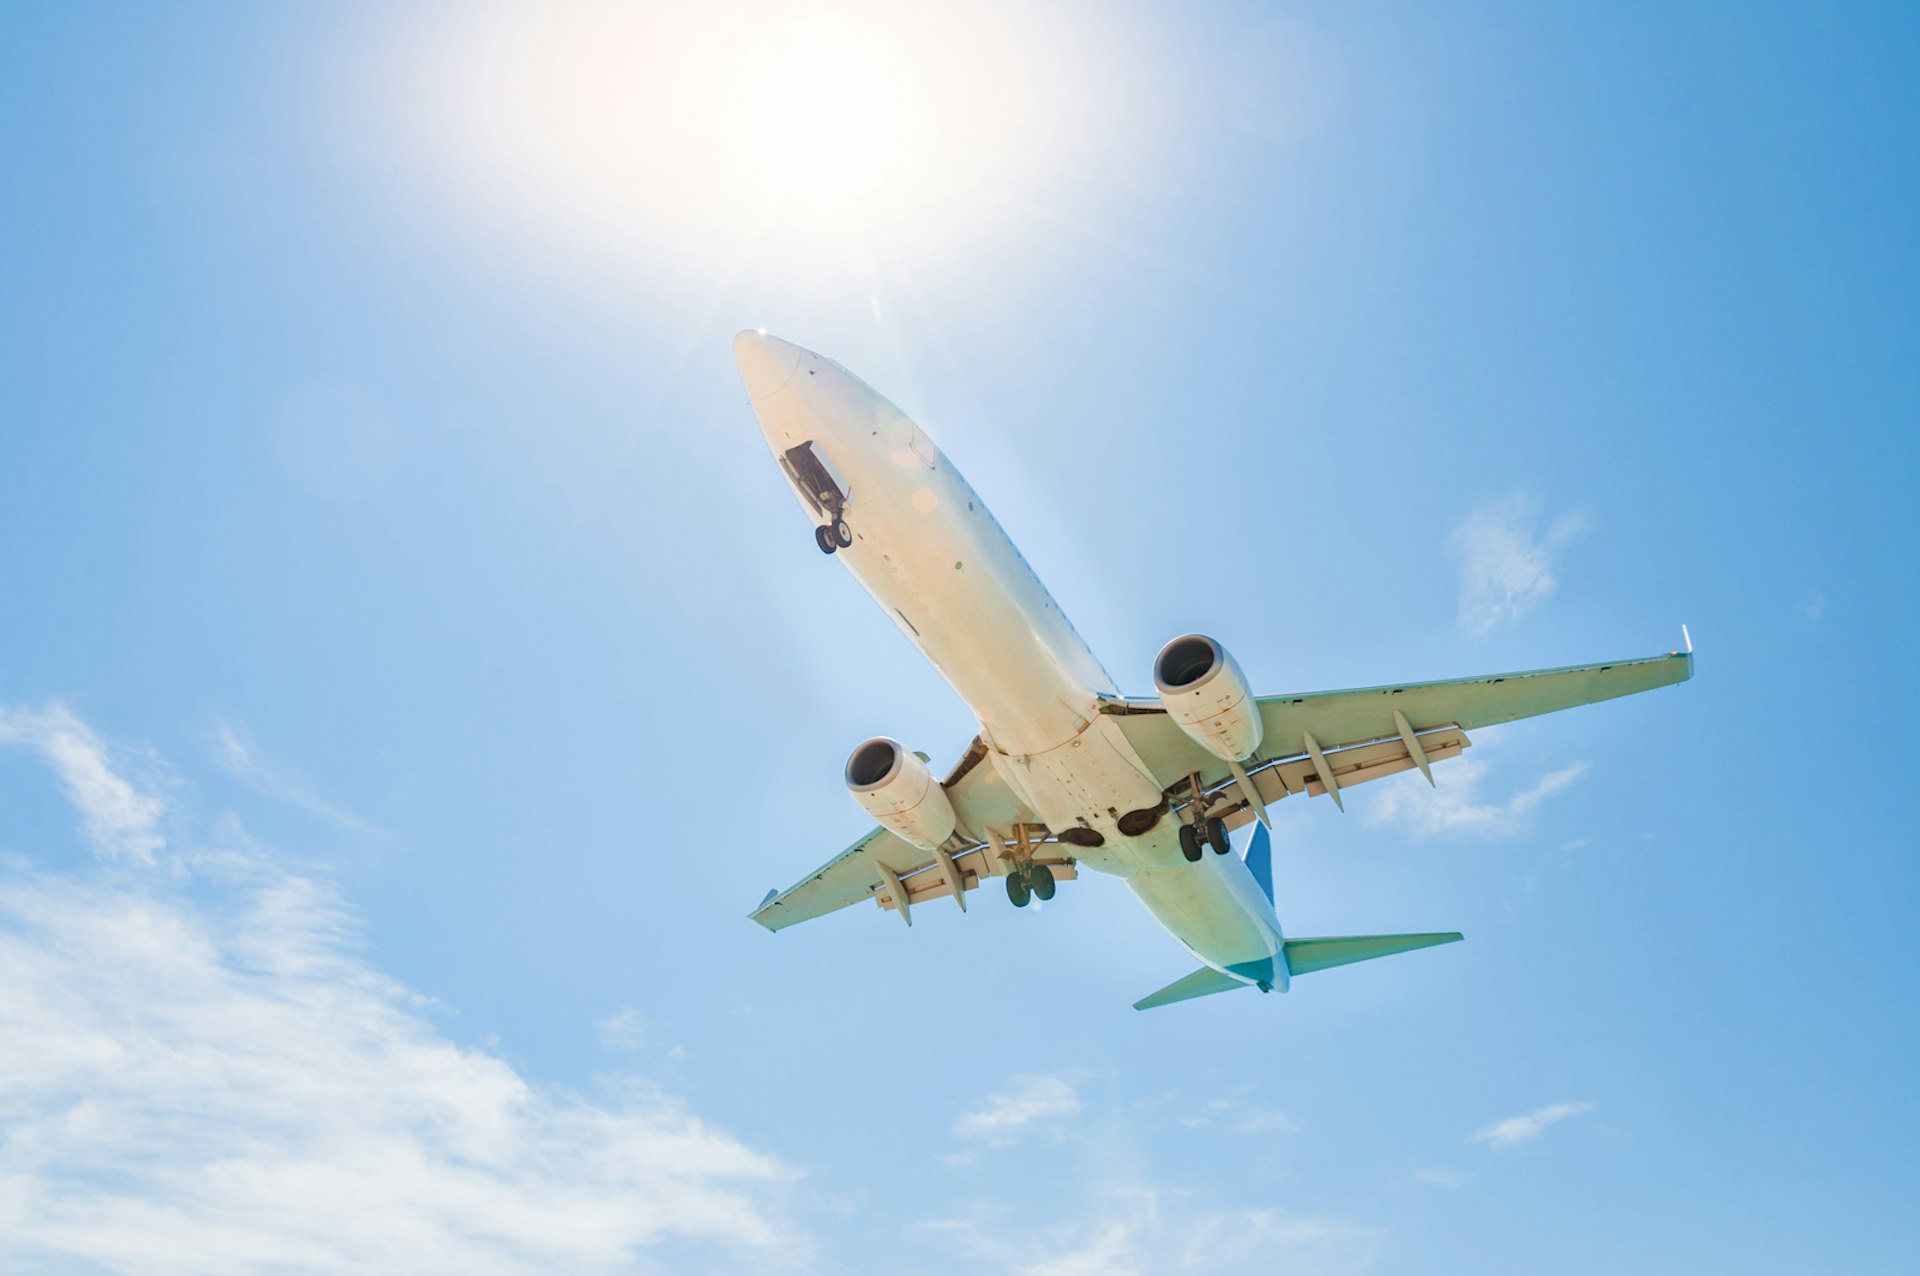 An airplane coming in for a landing, with the sun shining brightly above; what causes air turbulence